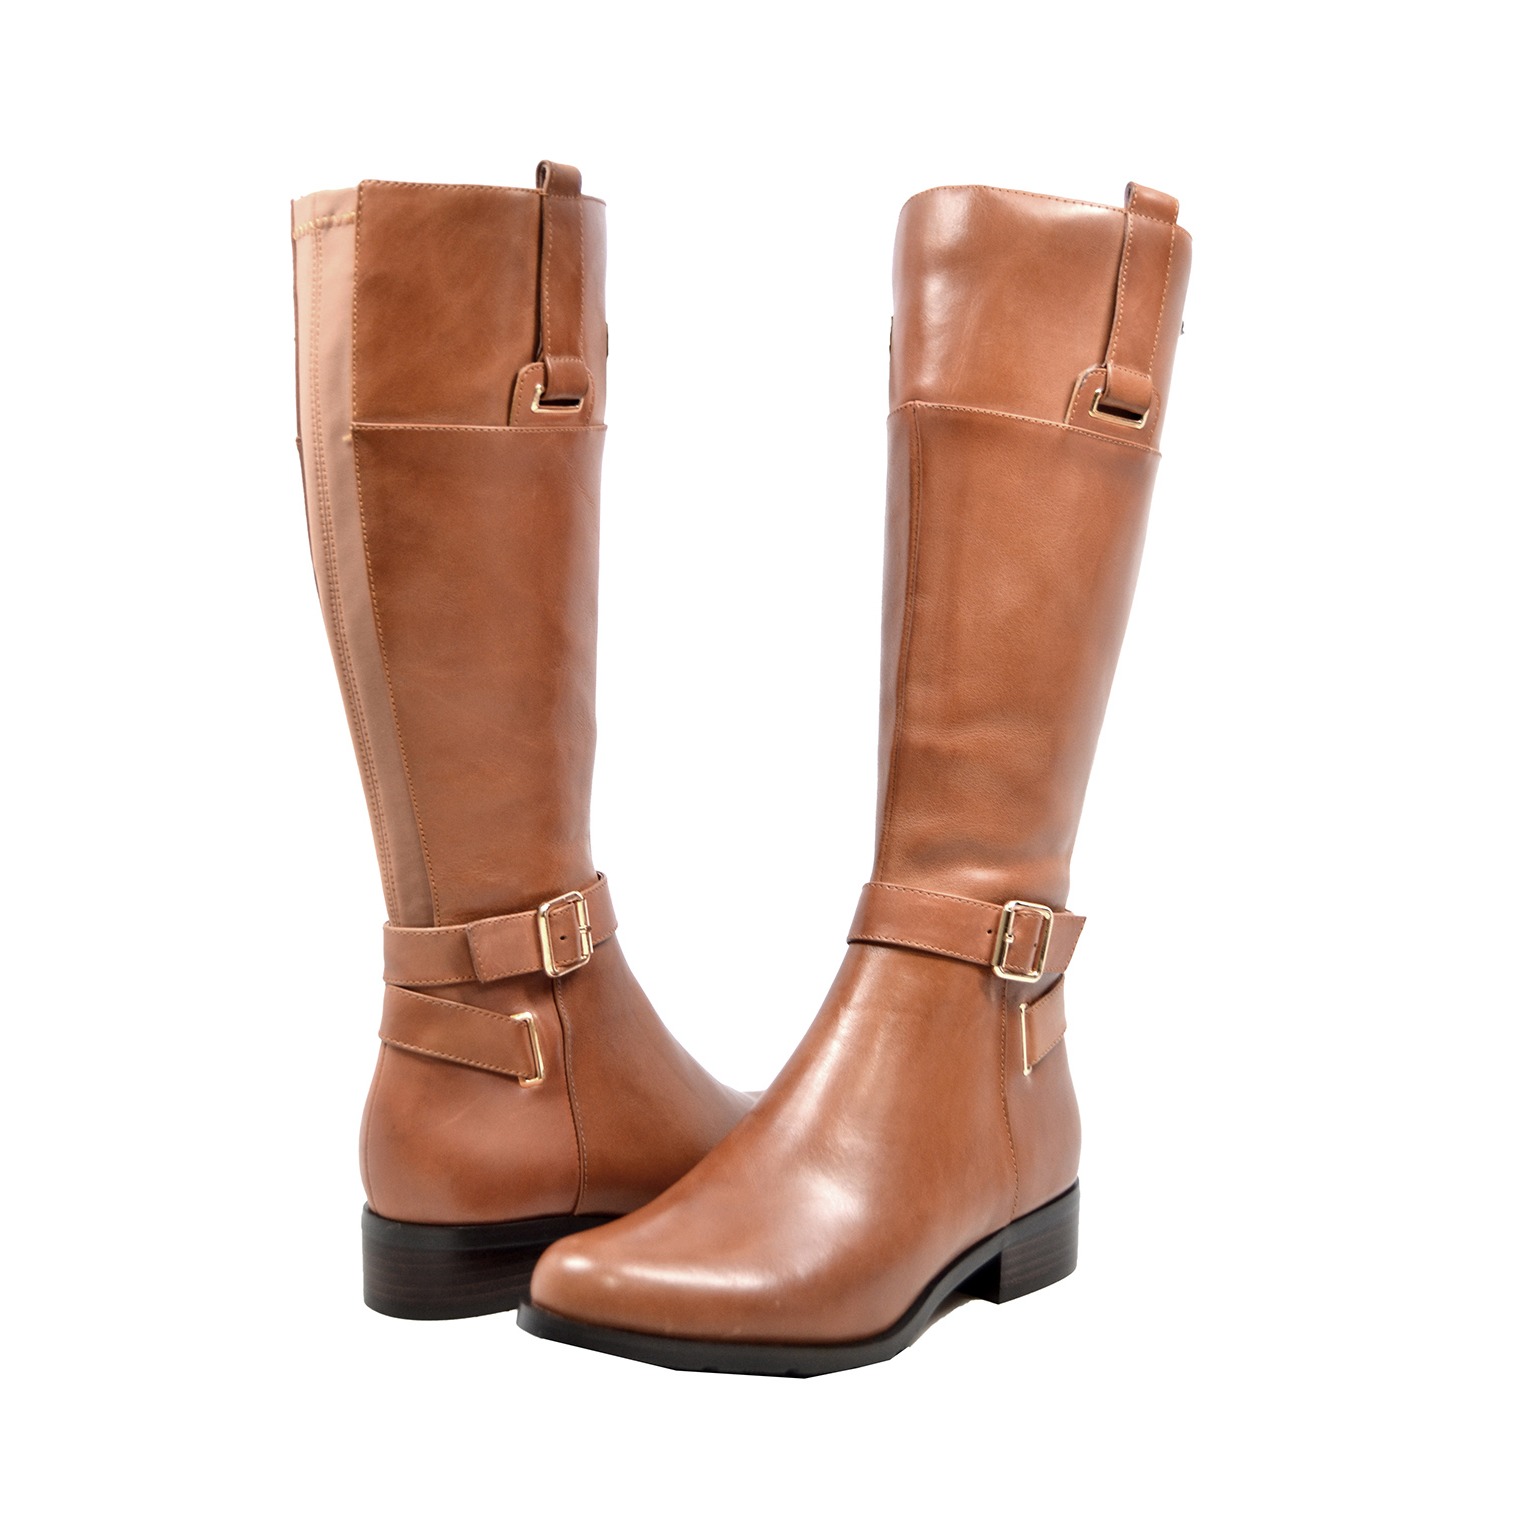 skinny calf riding boots